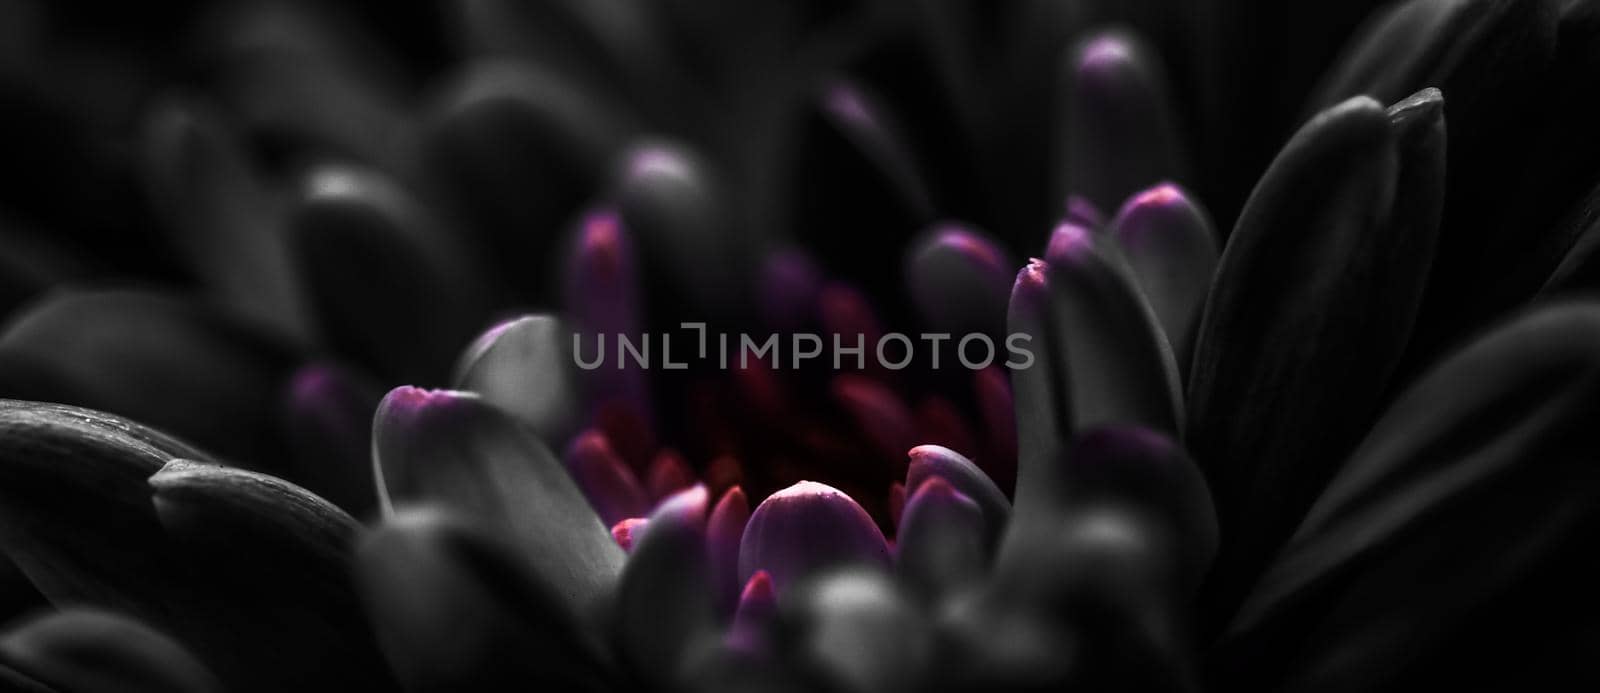 Black daisy flower petals in bloom, abstract floral blossom art background, flowers in spring nature for perfume scent, wedding, luxury beauty brand holiday design by Anneleven